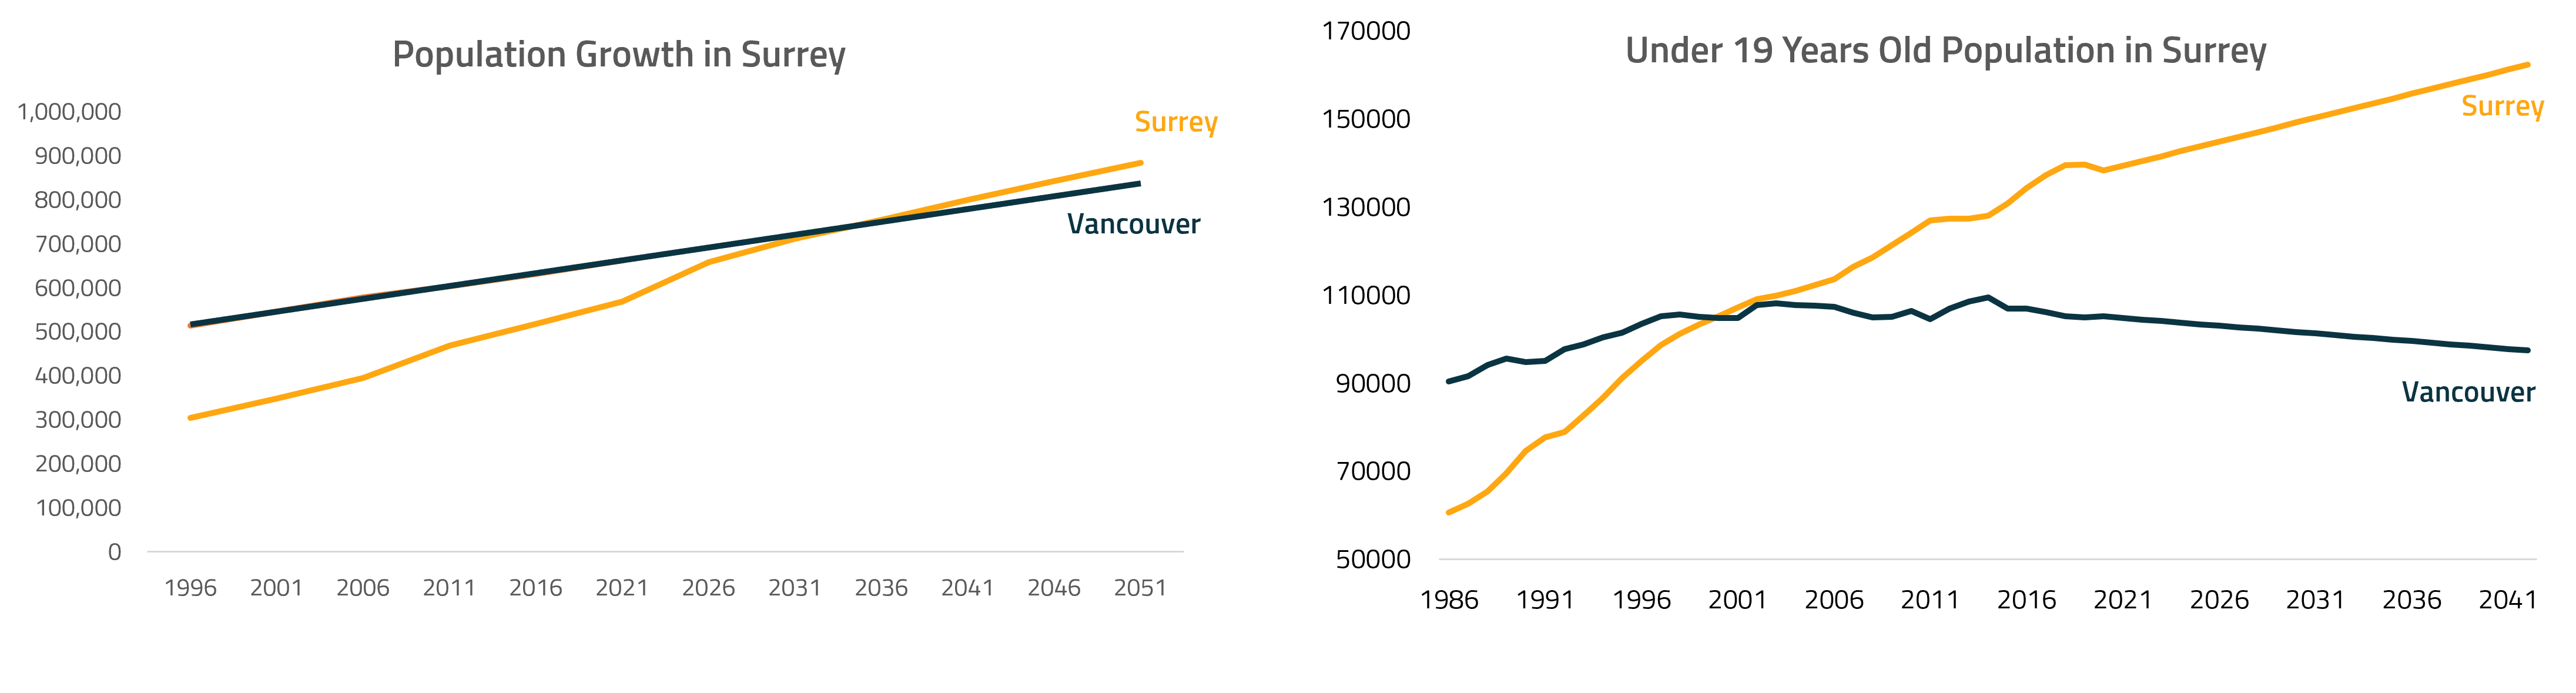 Two graphs depicting the population growth in Surrey and the Under-19 population in Surrey